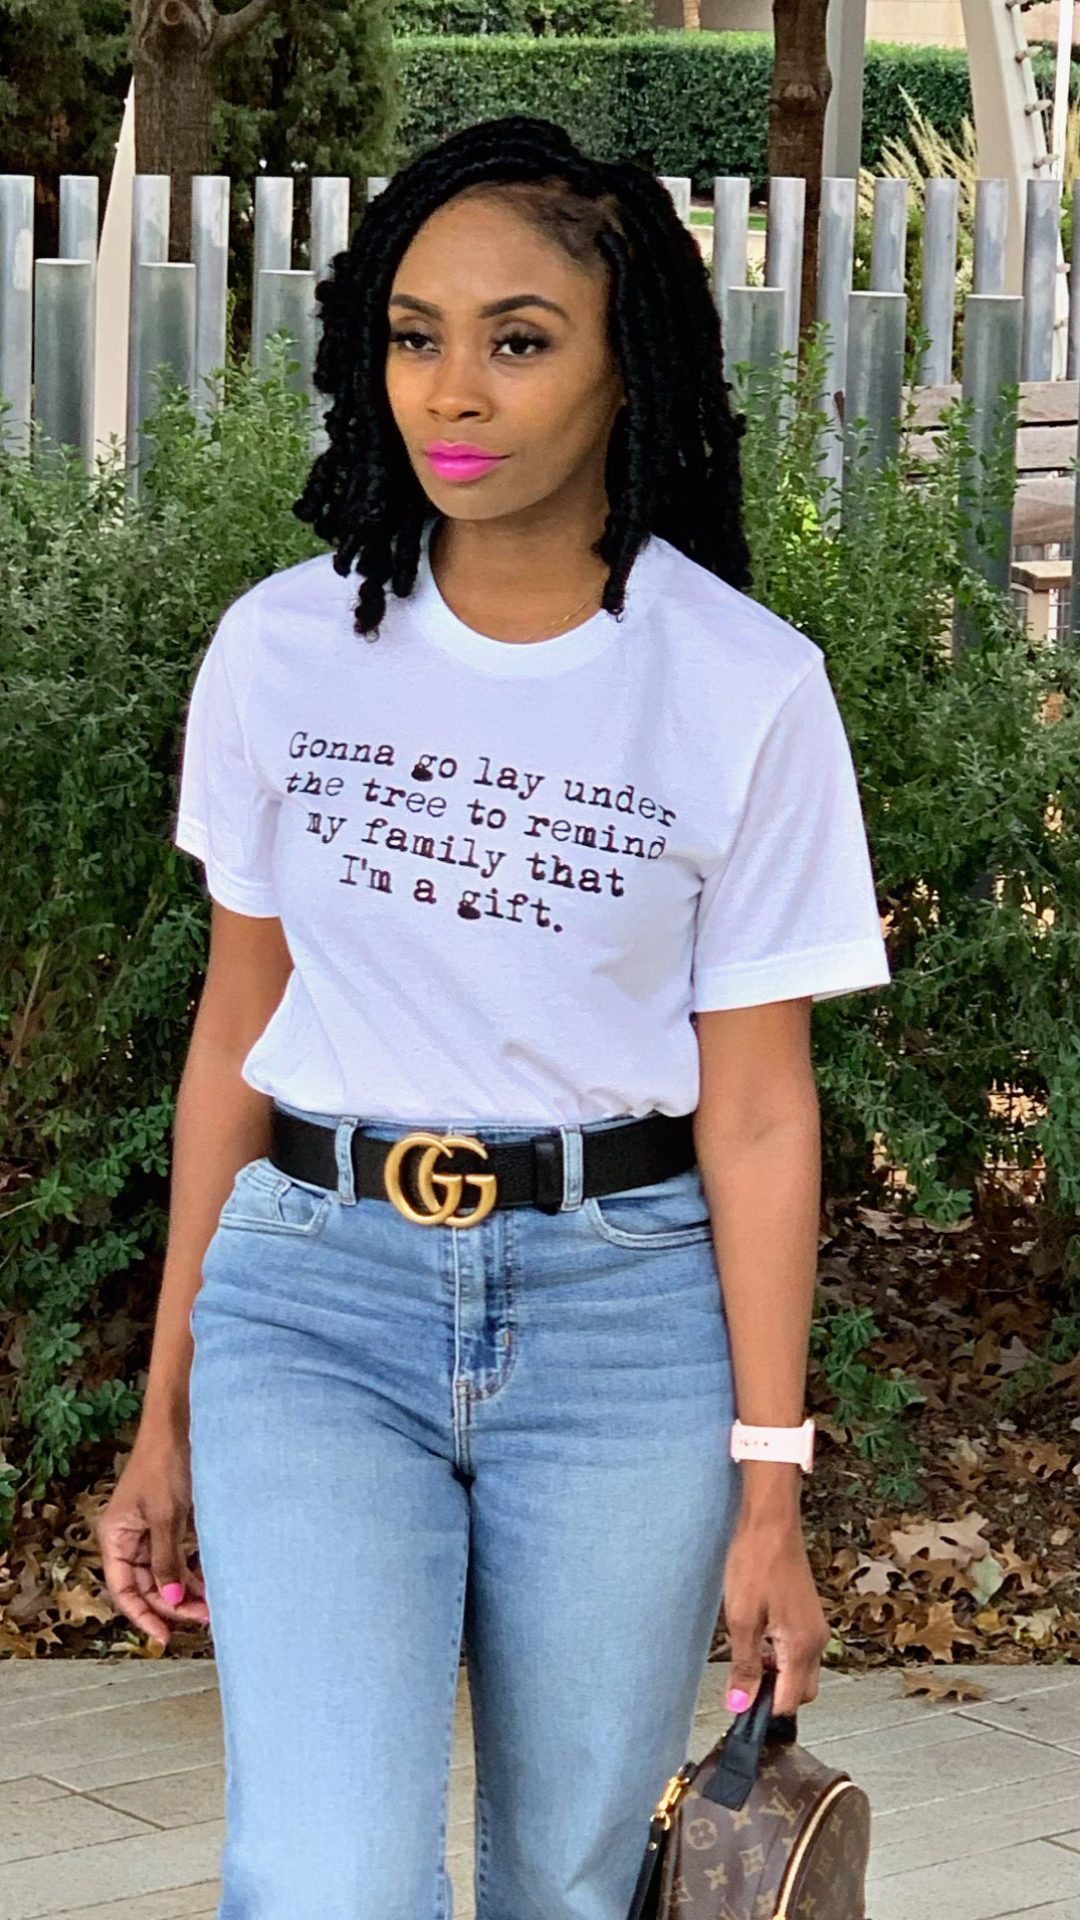 "I'm the Gift" Graphic Tee